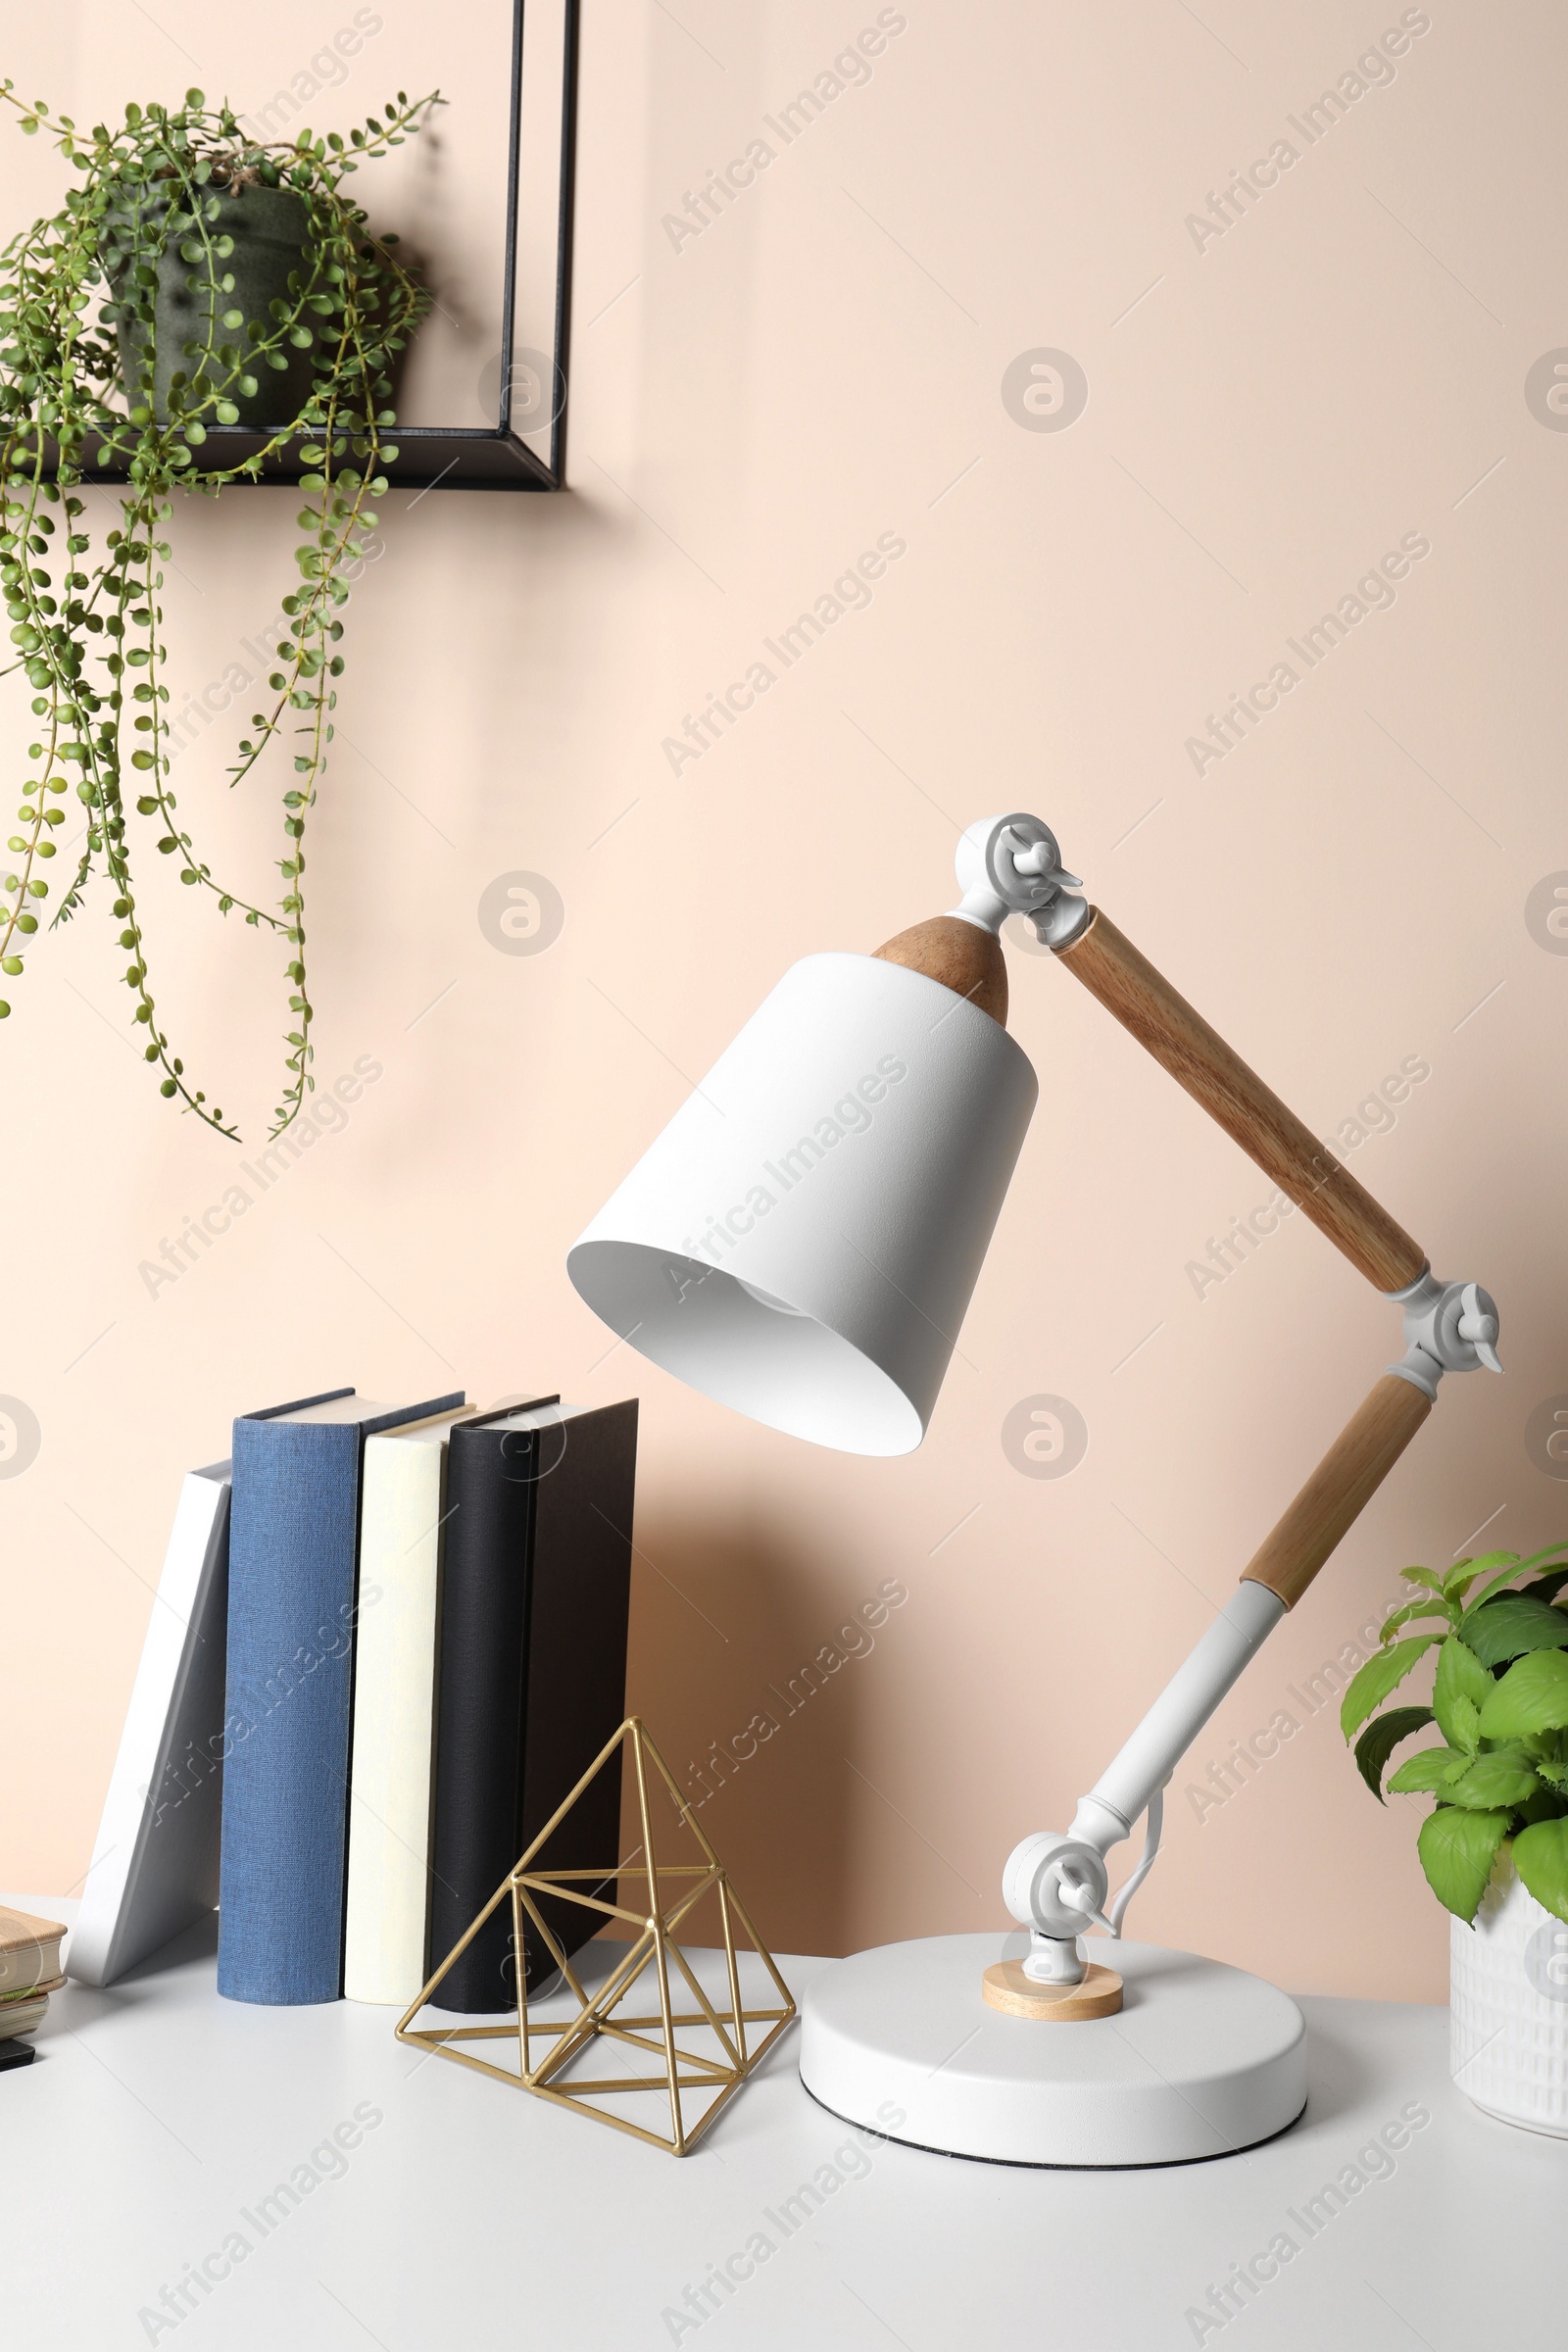 Photo of Stylish modern desk lamp, books and plant on table near beige wall indoors